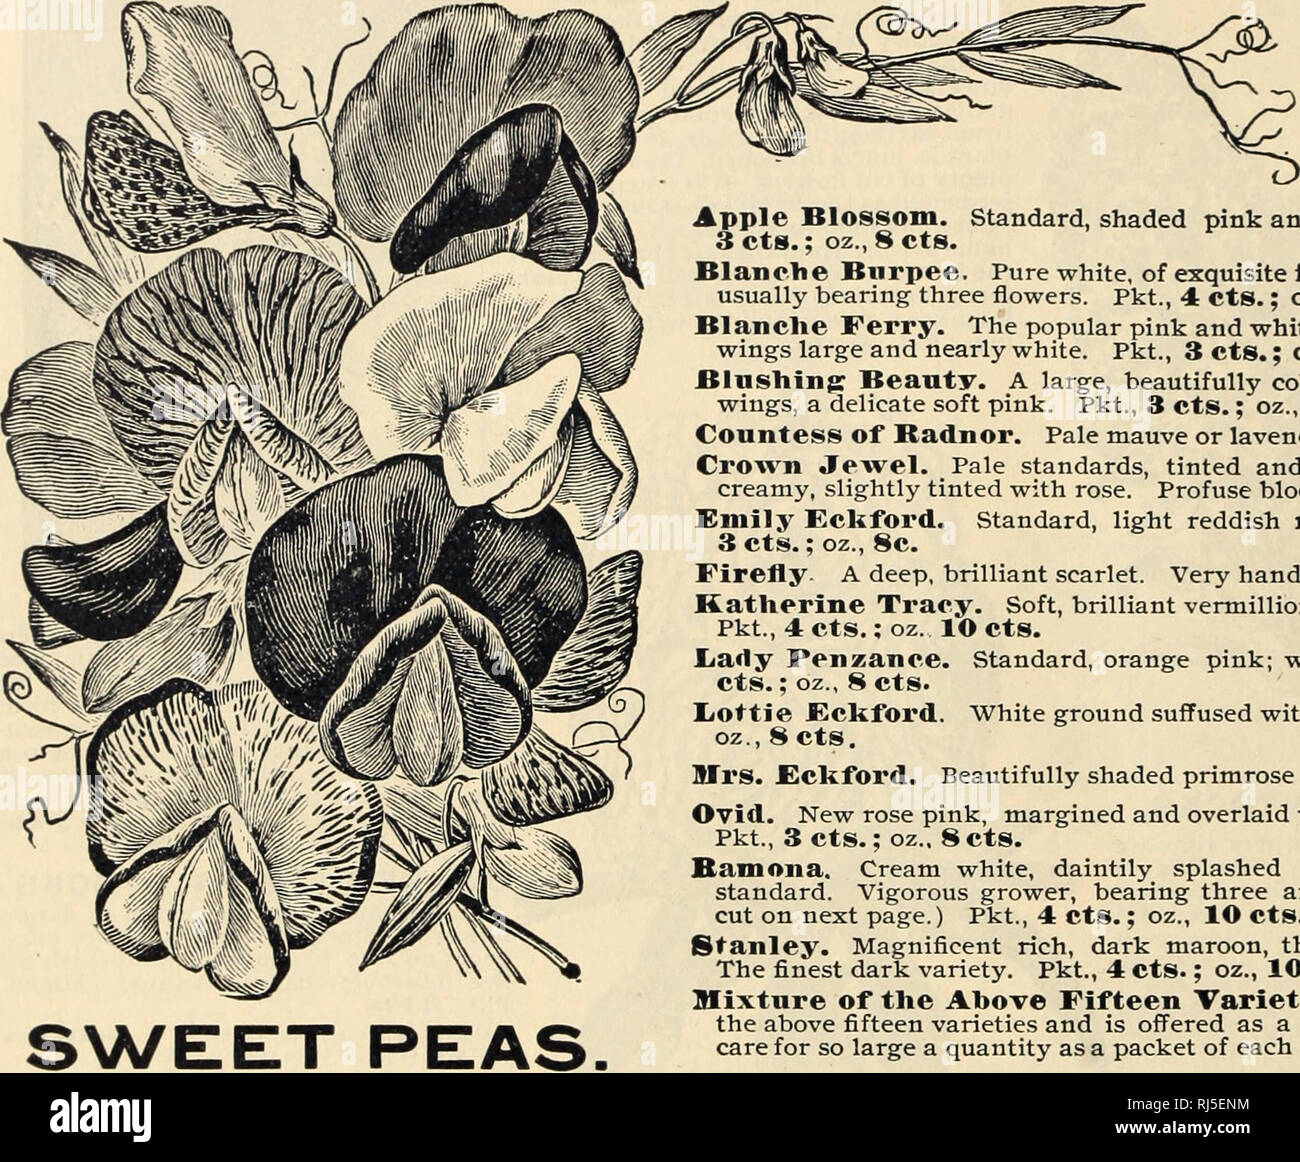 . Choice flower seeds. Flowers Seeds Catalogs; Seeds Catalogs. pie Blossom. Standard, shaded pink and rose, wings, pale pink. cts.; oz., 8 cts.. MISS EMMA V. WHITE. St. Croix Falls, Wis., Oct. 27, 1897.- &quot;All of my seeds purchased of you grew well and were all that they were recommended. The Sweet Peas were so beautiful and of such variety that they attracted much attention.&quot; Mrs. Wu. M. Blandino. Flint, Mich.. Aug. 13, 1897.—&quot;I have some beautiful plants of Primulas and Cinerarias from your seed.&quot; Mrs. M. S. Kbehet. Pkt., Cassville, Ind., January, 1897.—&quot;Your flowers  Stock Photo